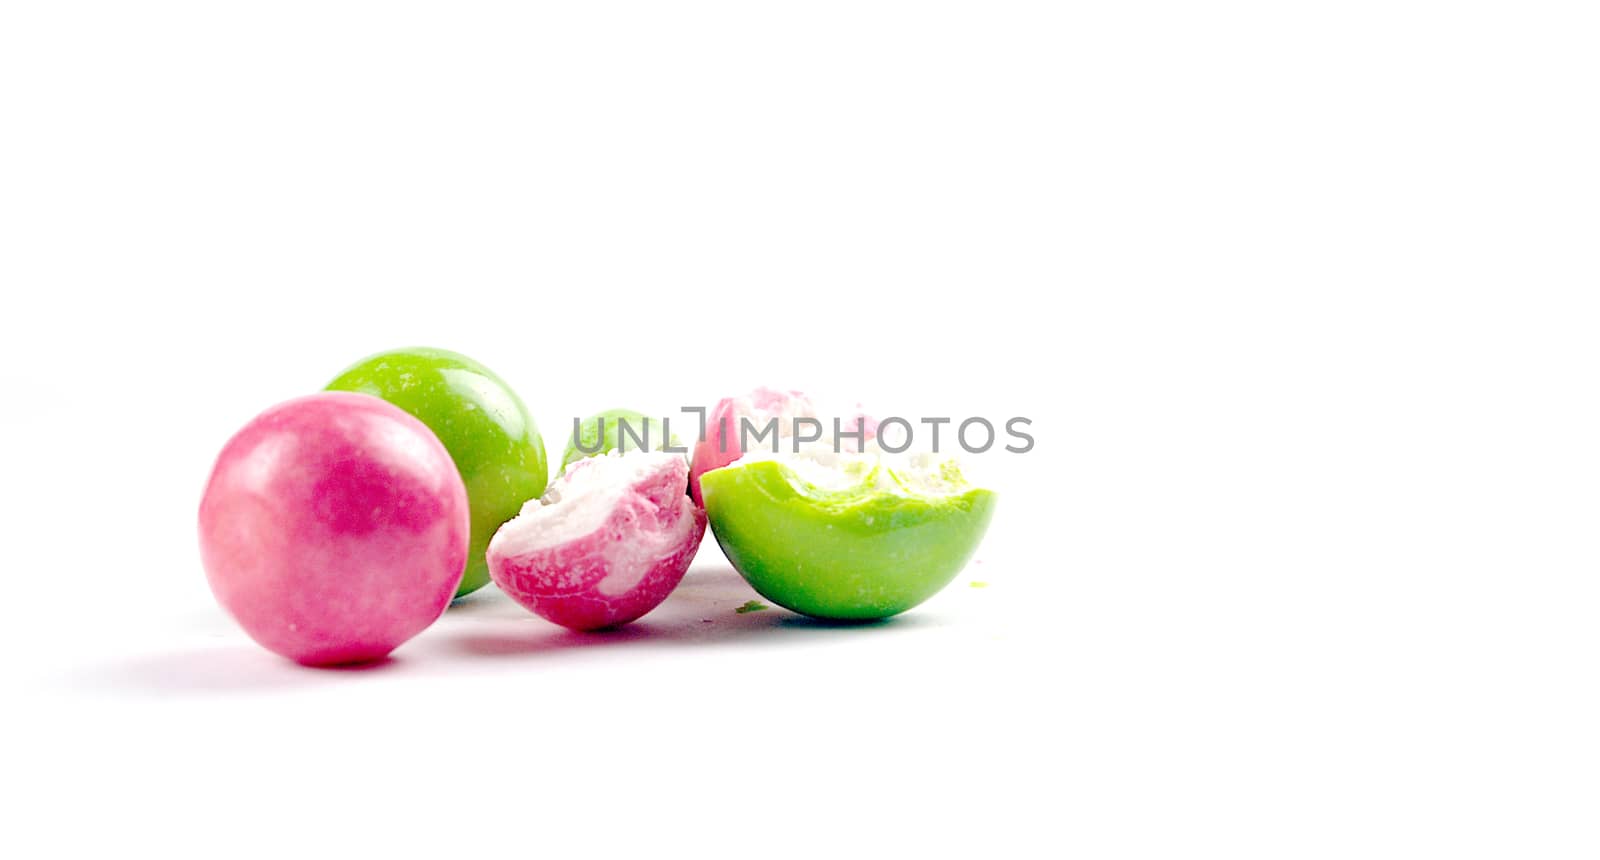 pink and green gumballs on a white background.